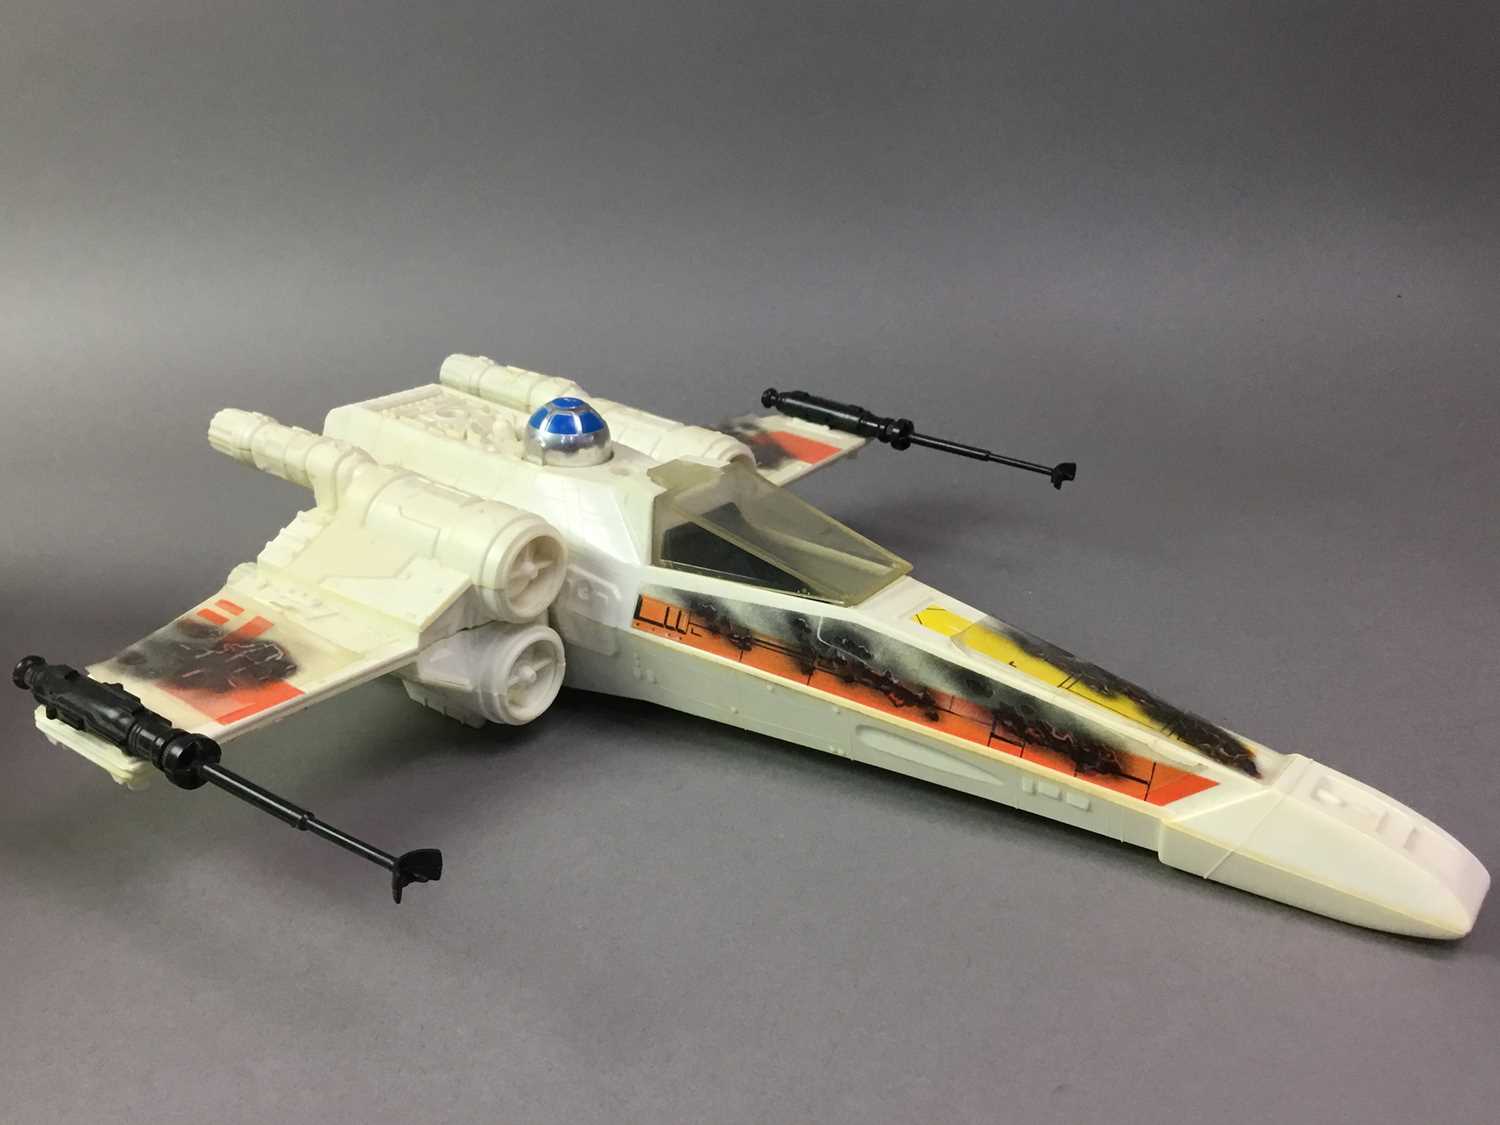 Lot 949 - STAR WARS, X-WING FIGHTER VEHICLE BY KENNER